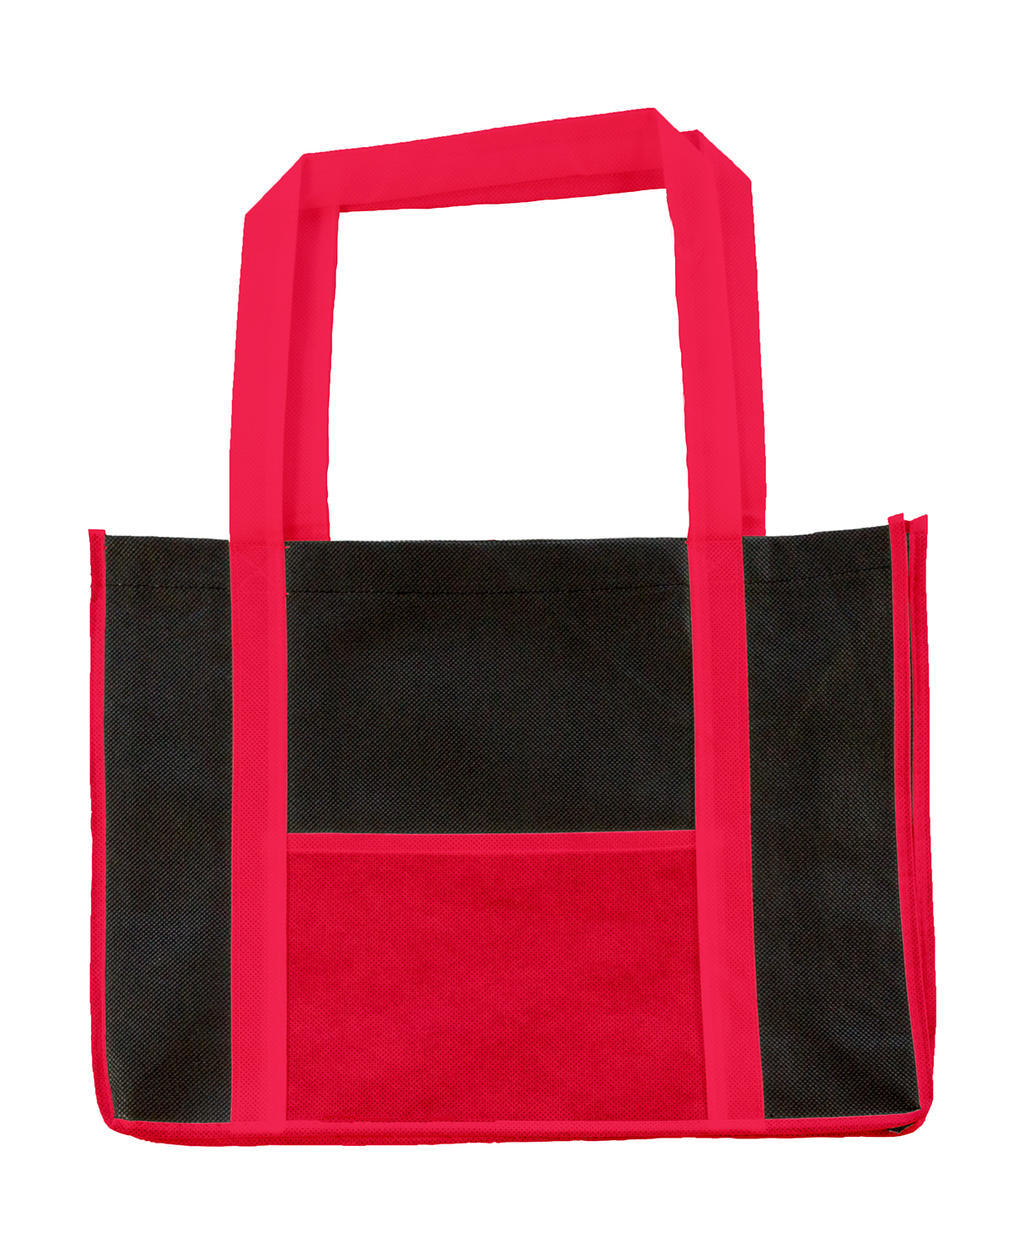  Leisure Bag LH in Farbe Red/Black